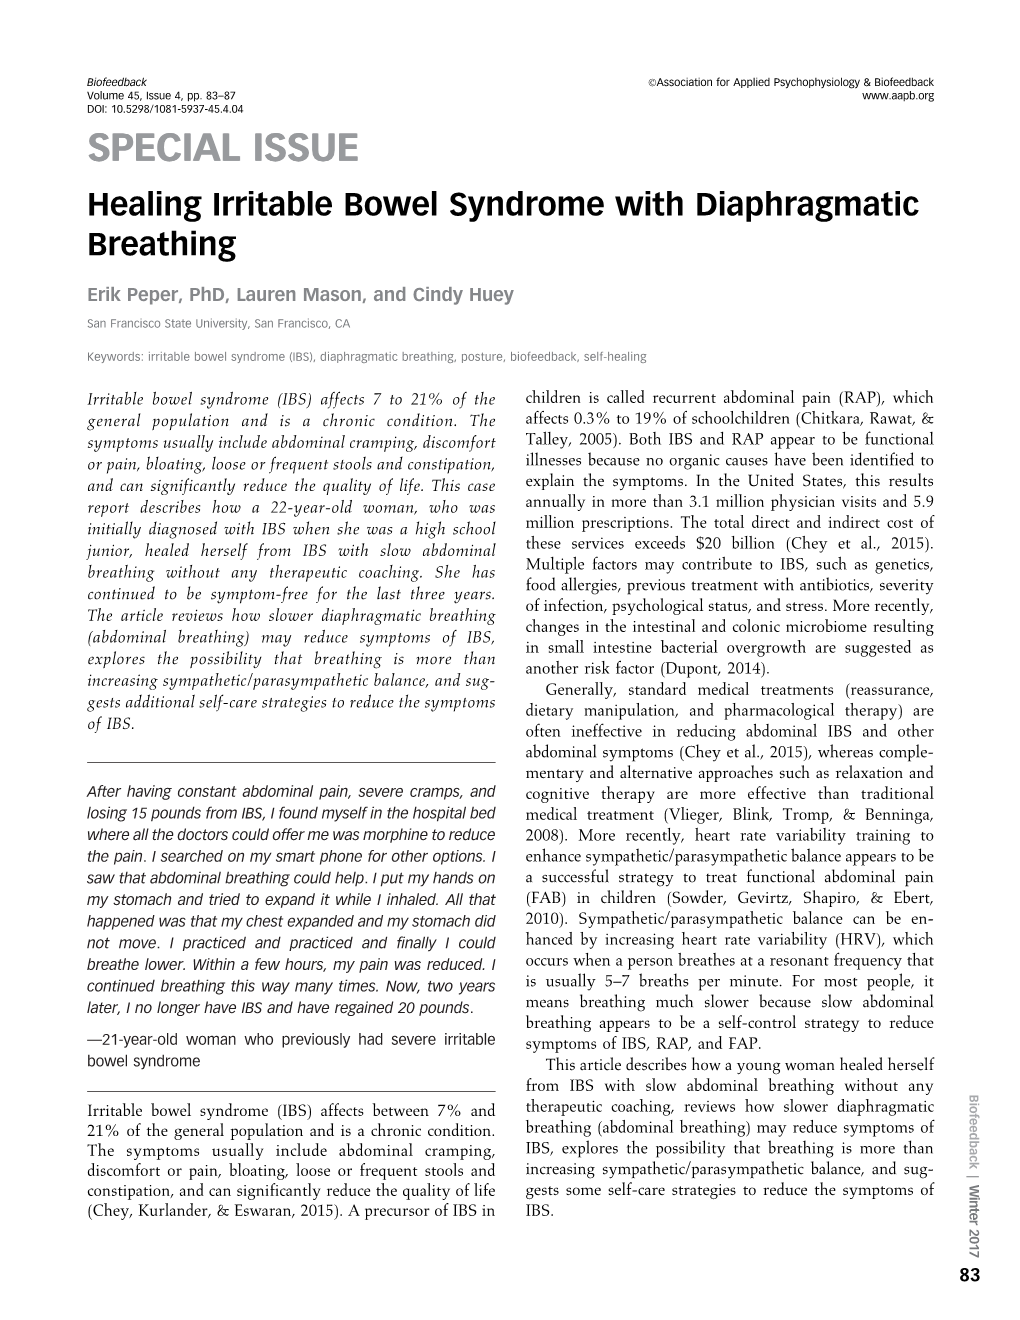 Healing Irritable Bowel Syndrome with Diaphragmatic Breathing